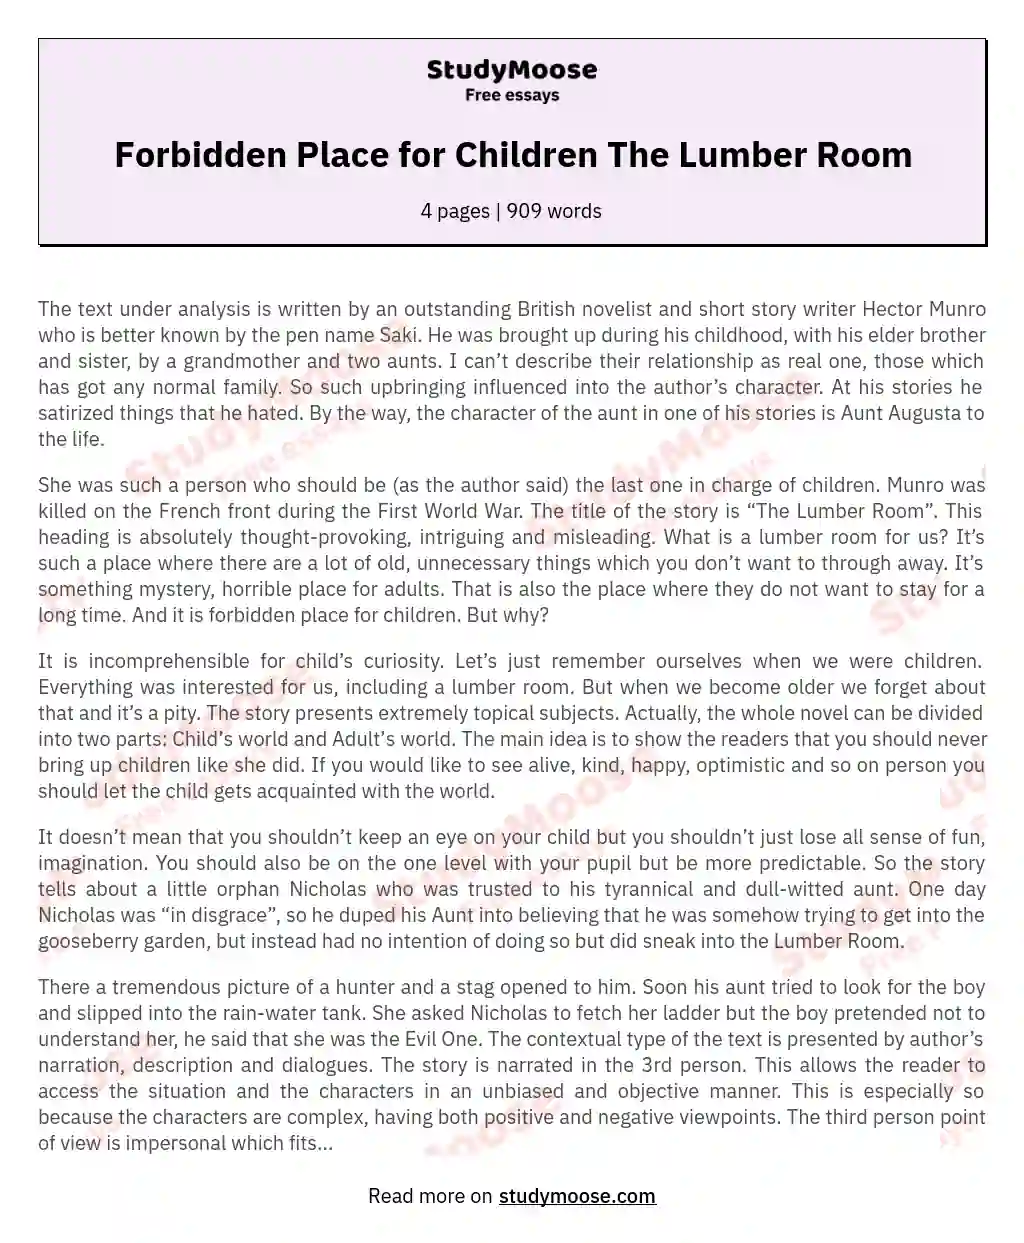 Forbidden Place for Children The Lumber Room essay